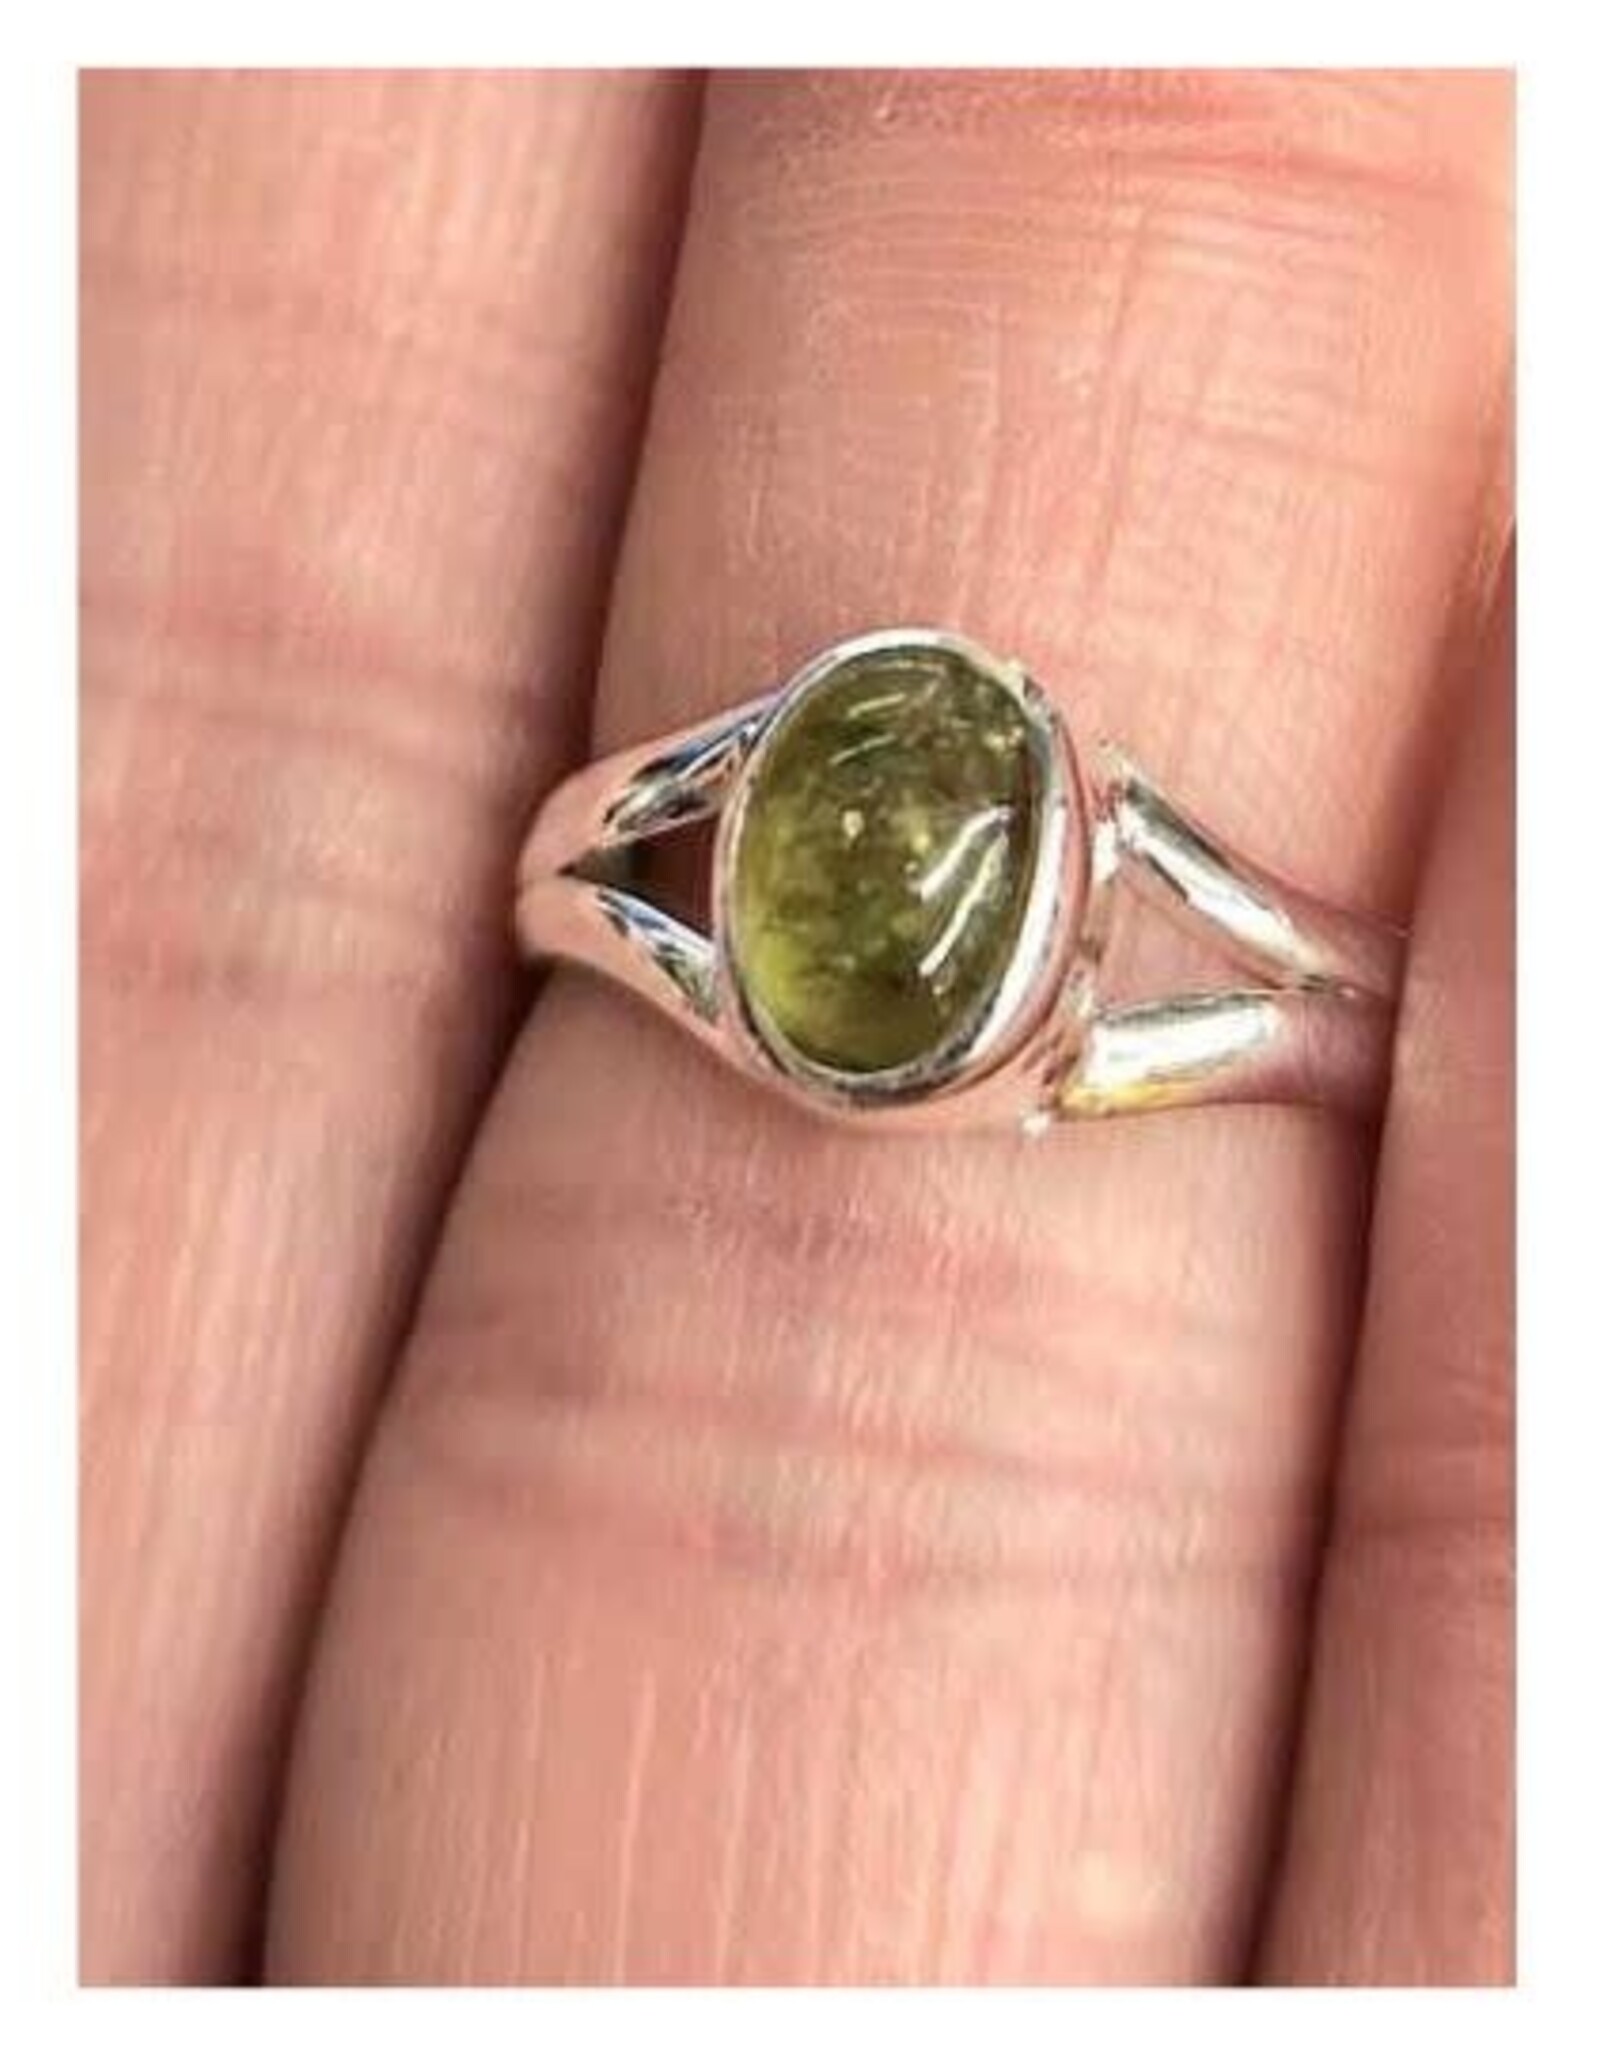 Peridot Ring A - Size 6 Sterling Silver